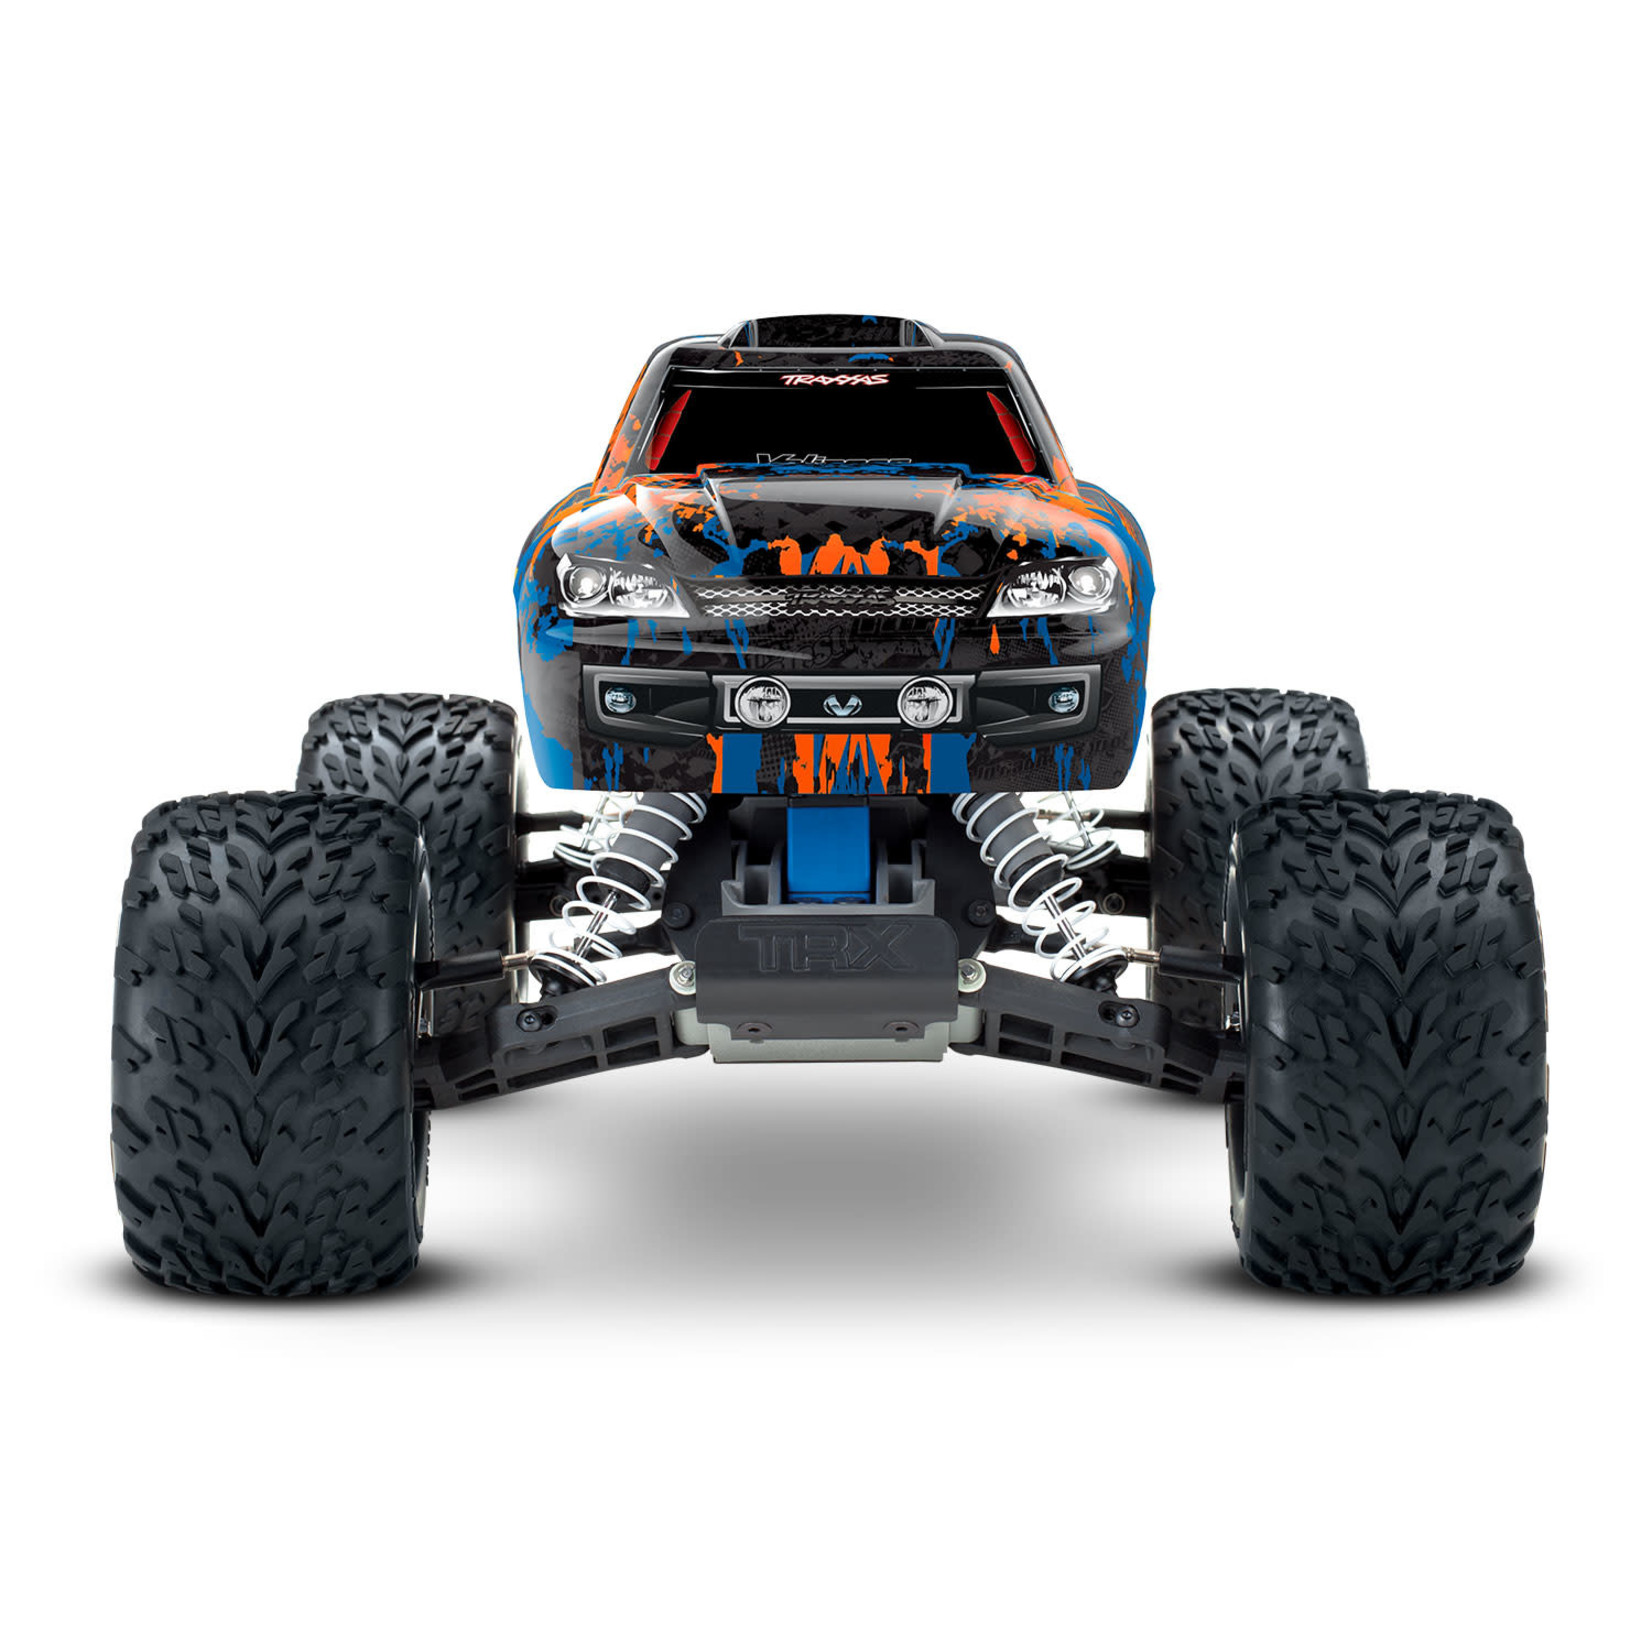 TRAXXAS Stampede® VXL:  1/10 Scale Monster Truck with TQi Traxxas Link™ Enabled 2.4GHz Radio System & Traxxas Stability Management (TSM)®